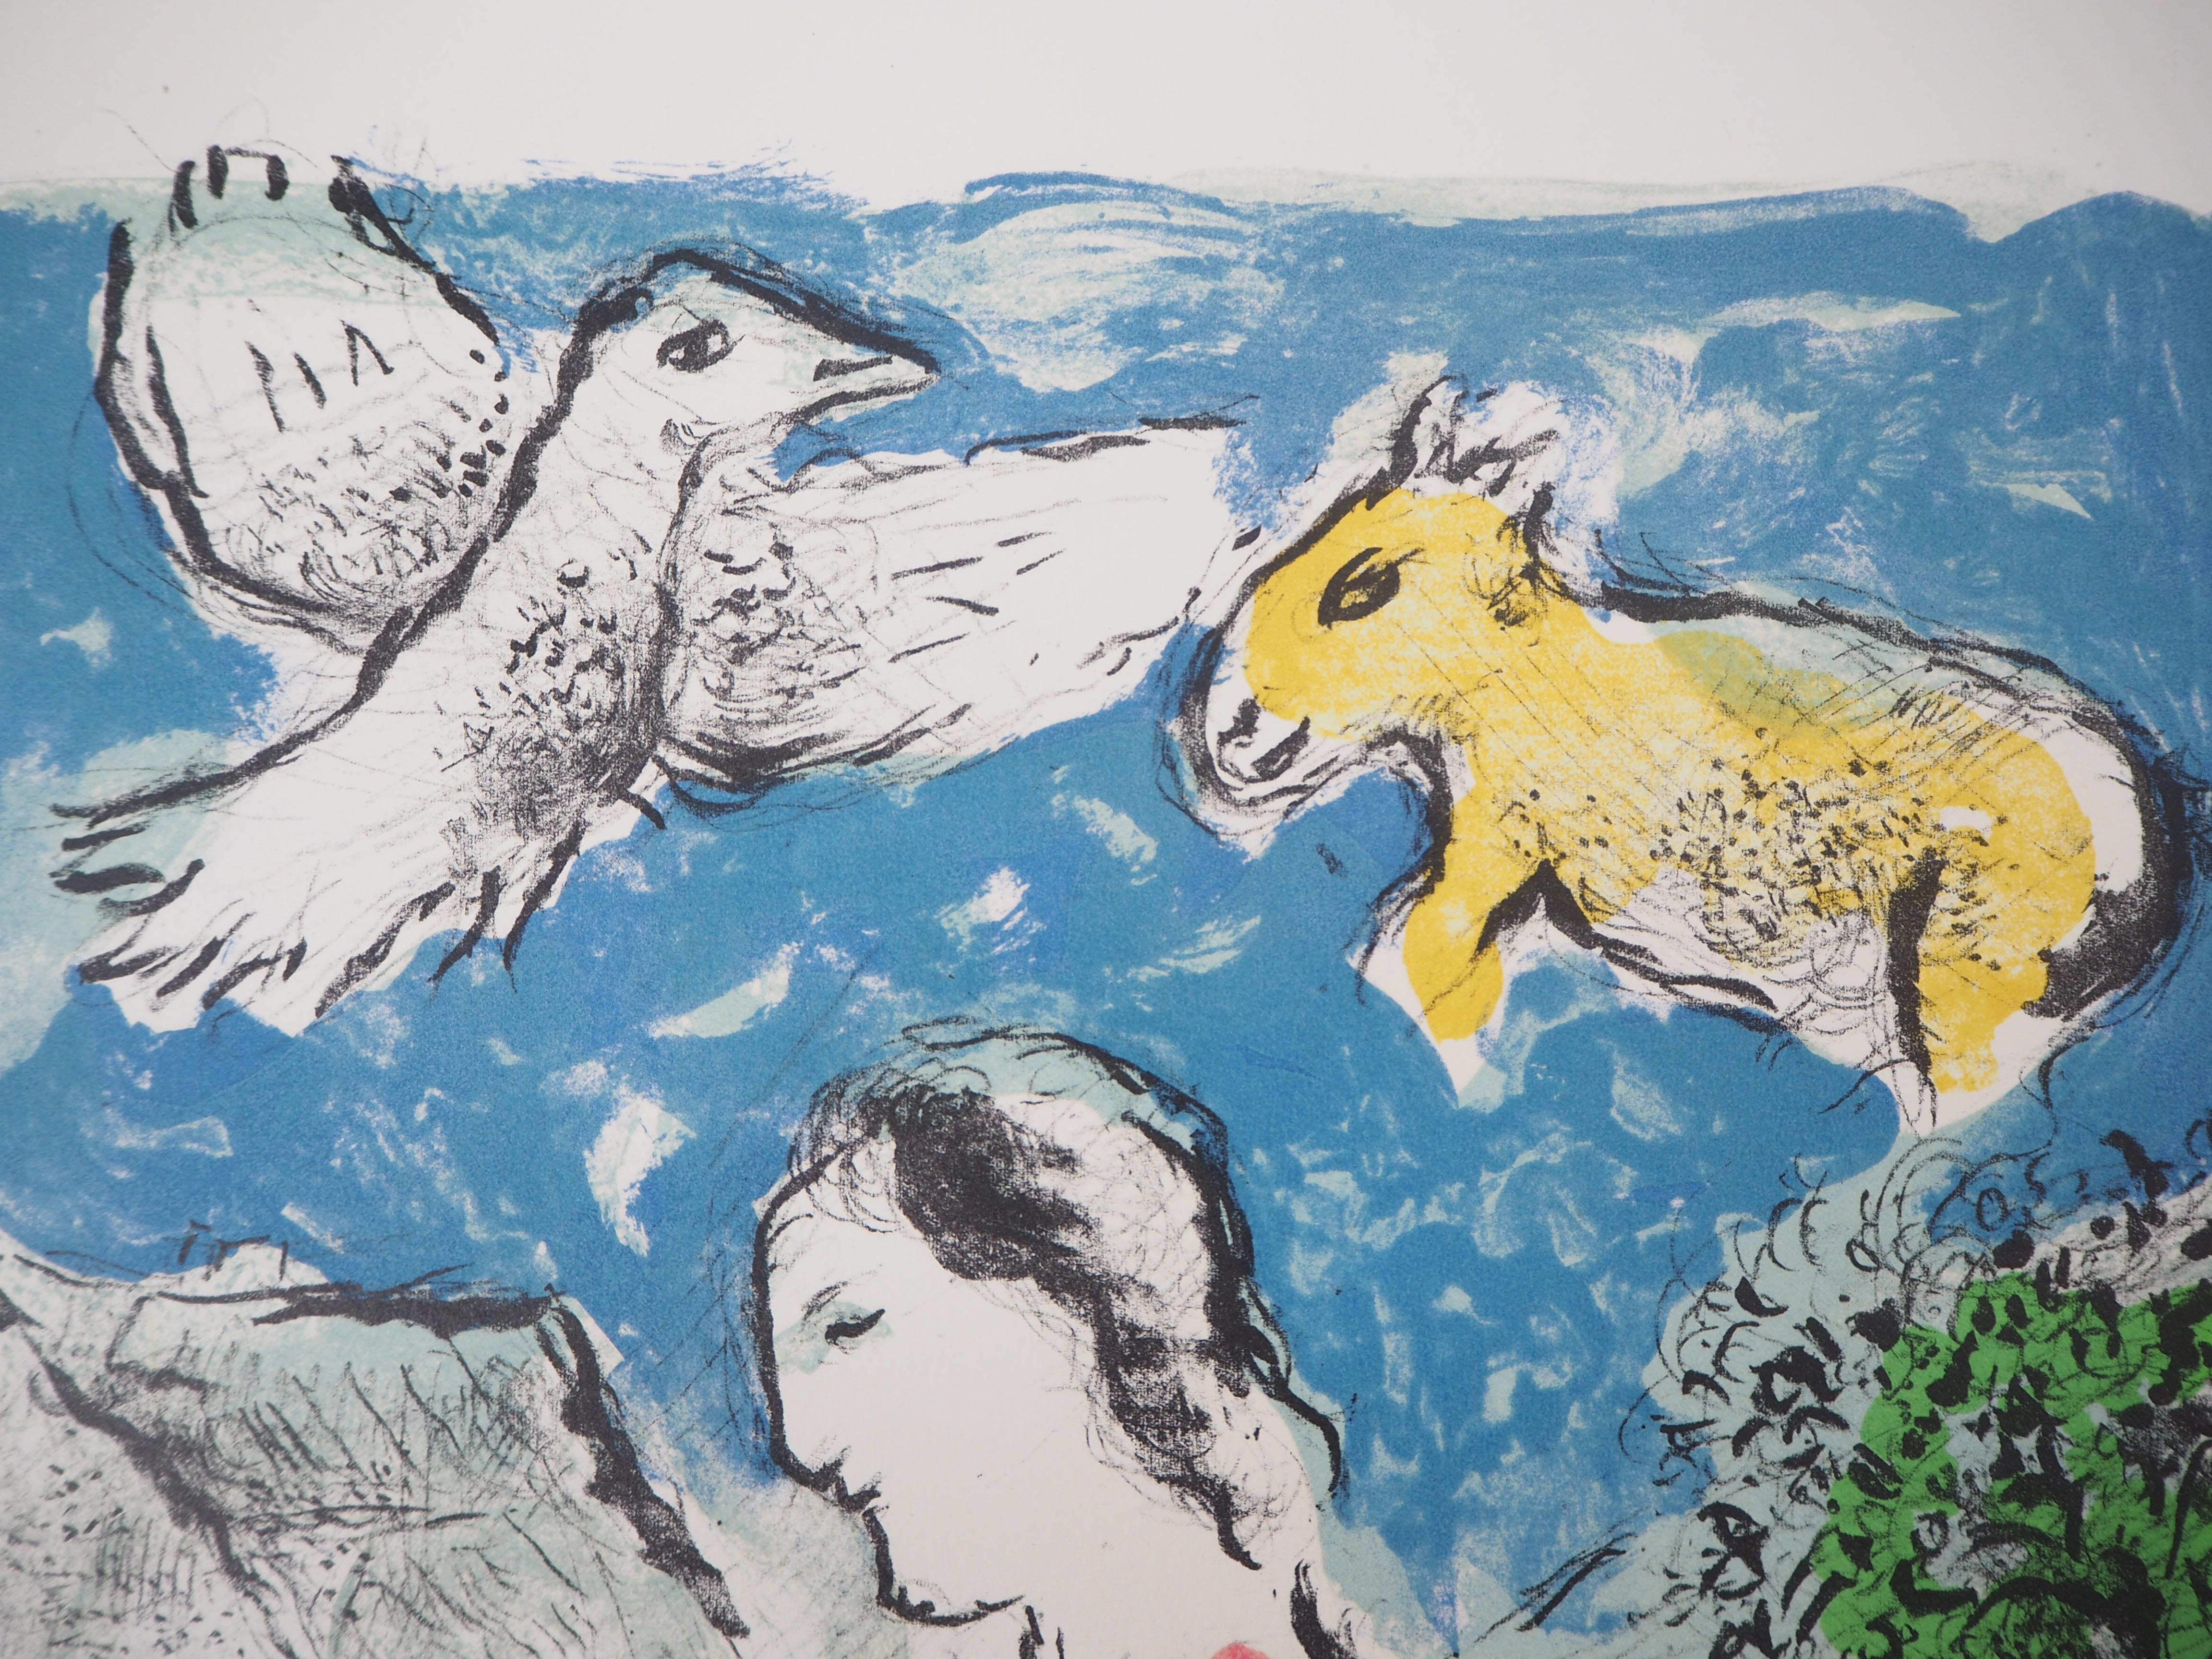 Marc CHAGALL
The Village (Woman, Bird and Donkey), 1977

Original lithograph 
Unsigned
On Arches vellum 47 x 64 cm (c. 19 x 26 in)
Authenticated with the blind stamp of Galerie Michel, Paris

REFERENCES : Catalog raisonne Mourlot #917a
Limited